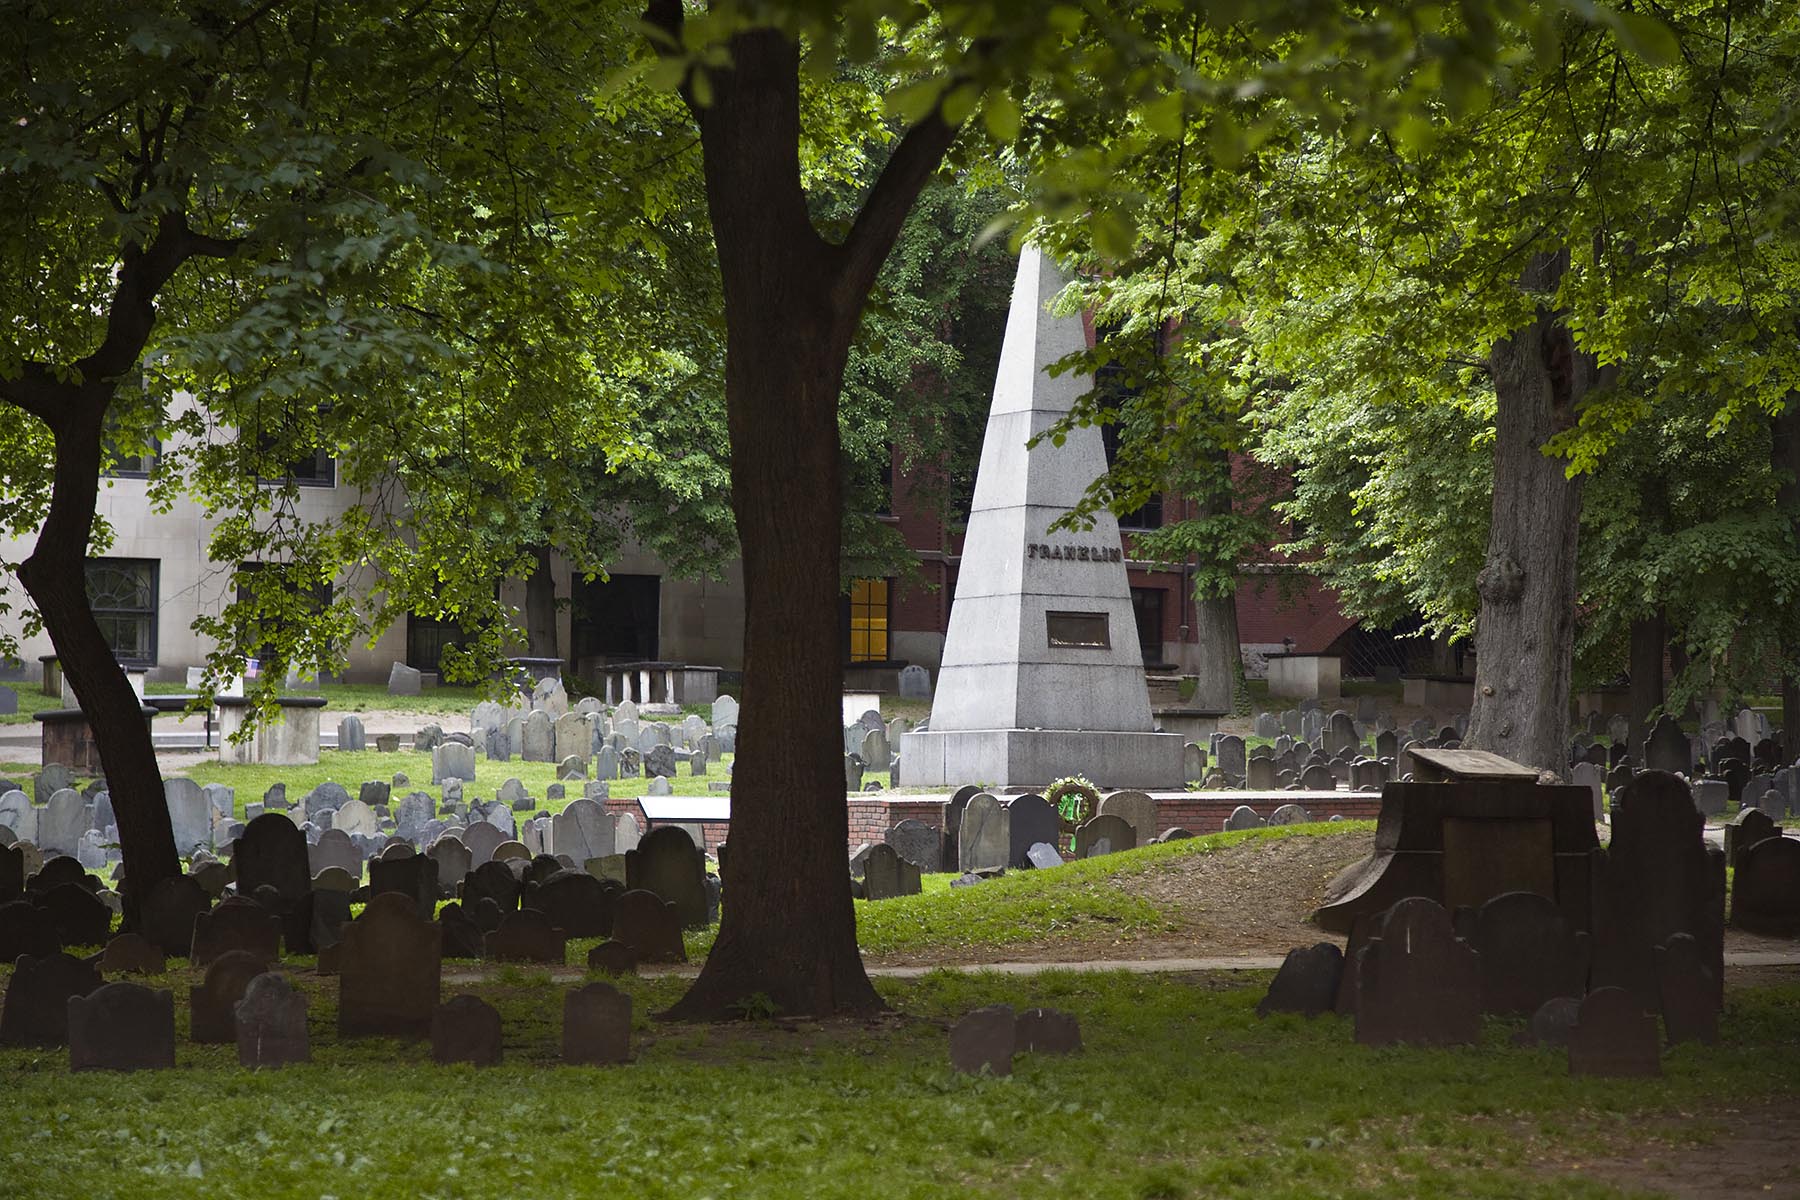 Pyramid shaped memorial to the family of Benjamin Franklin in the GRANARY BURYING GROUND, the third oldest cemetery in the United States - BOSTON, MASSACHUSETTS